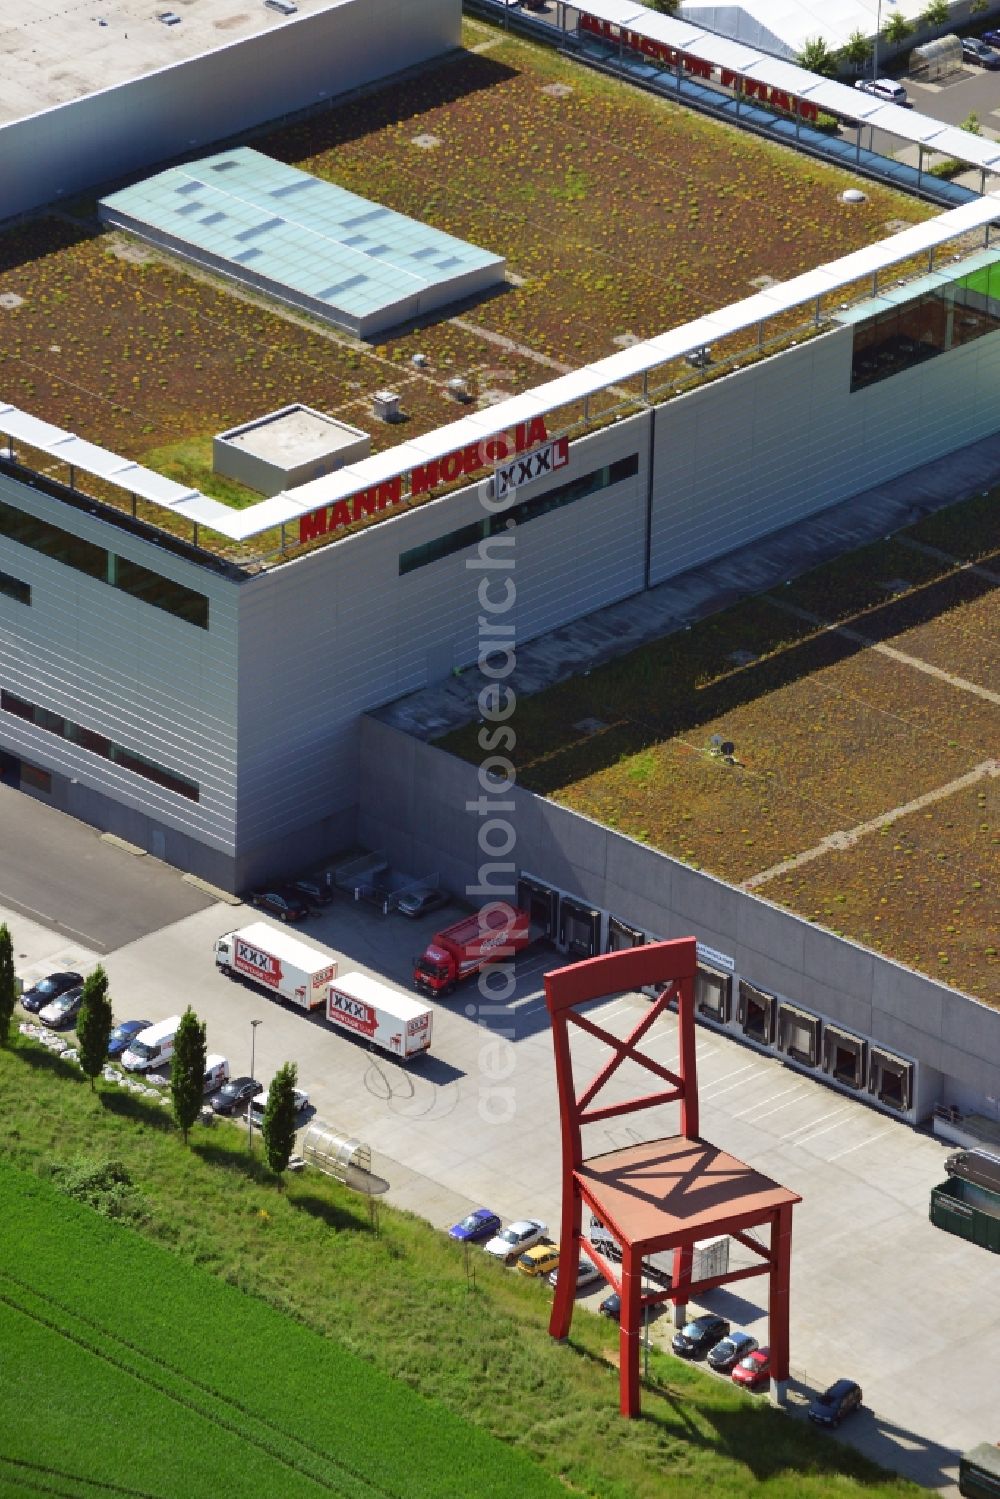 Aerial image Eschborn - The Mann Mobilia XXXL furniture store in Eschborn in the metropolitan area of Frankfurt am Main in the state of Hessen. View of the red chair, the trade mark of the XXXL furniture store chain